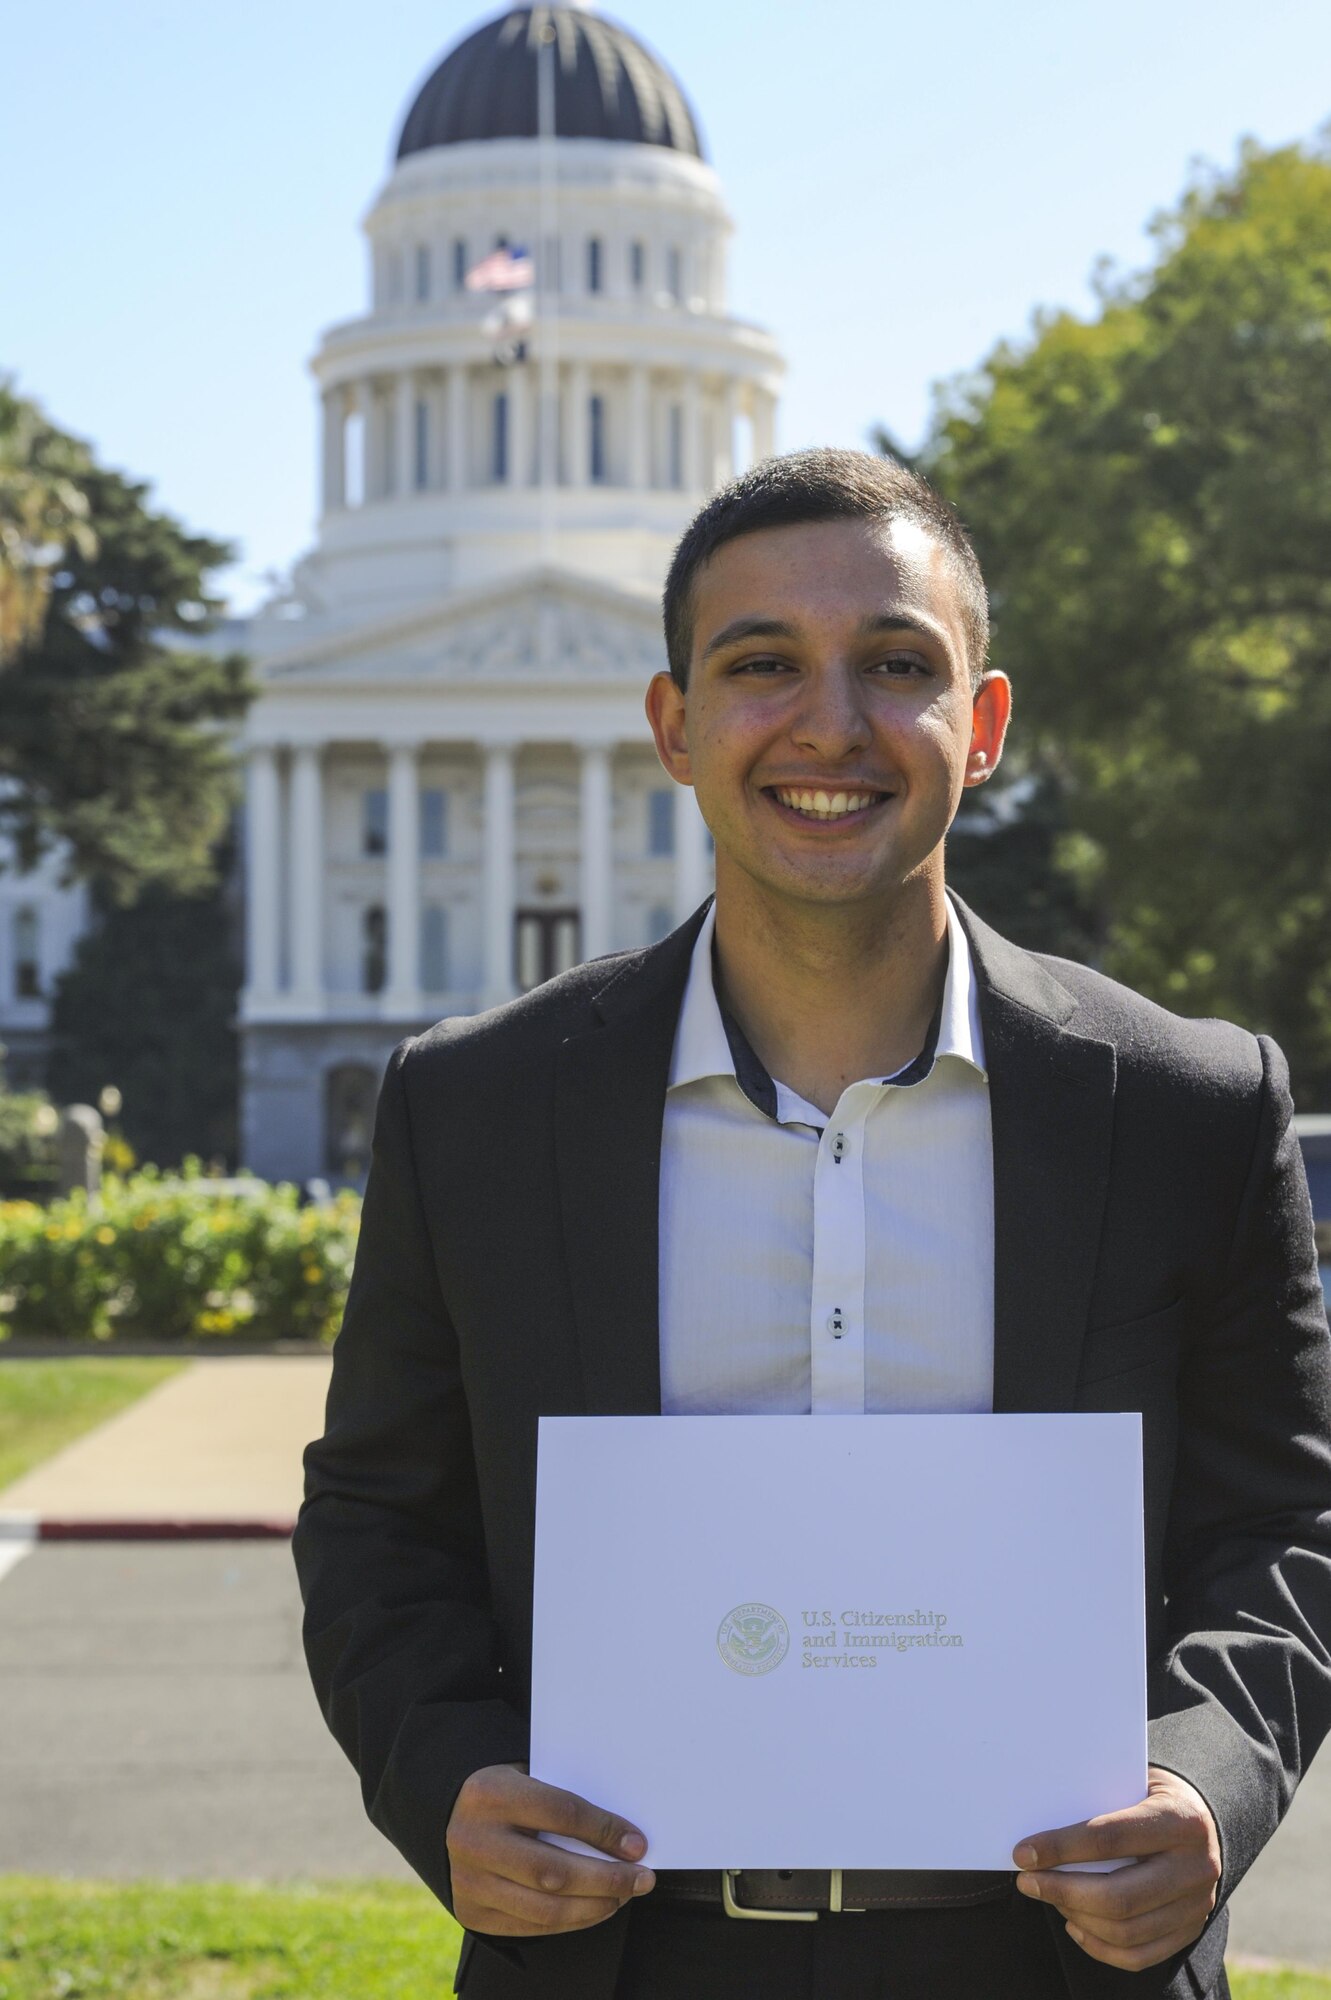 Airman Aris D. Soltani, a 940th Aircraft Maintenance Squadron personnelist, poses for a photo with U.S. citizenship certificate Oct. 11, 2016, in Sacramento, California. Soltani passed his citizenship test and recited the Oath of Allegiance earlier that day. (U.S. Air Force Photo by Senior Airman Tara R. Abrahams)